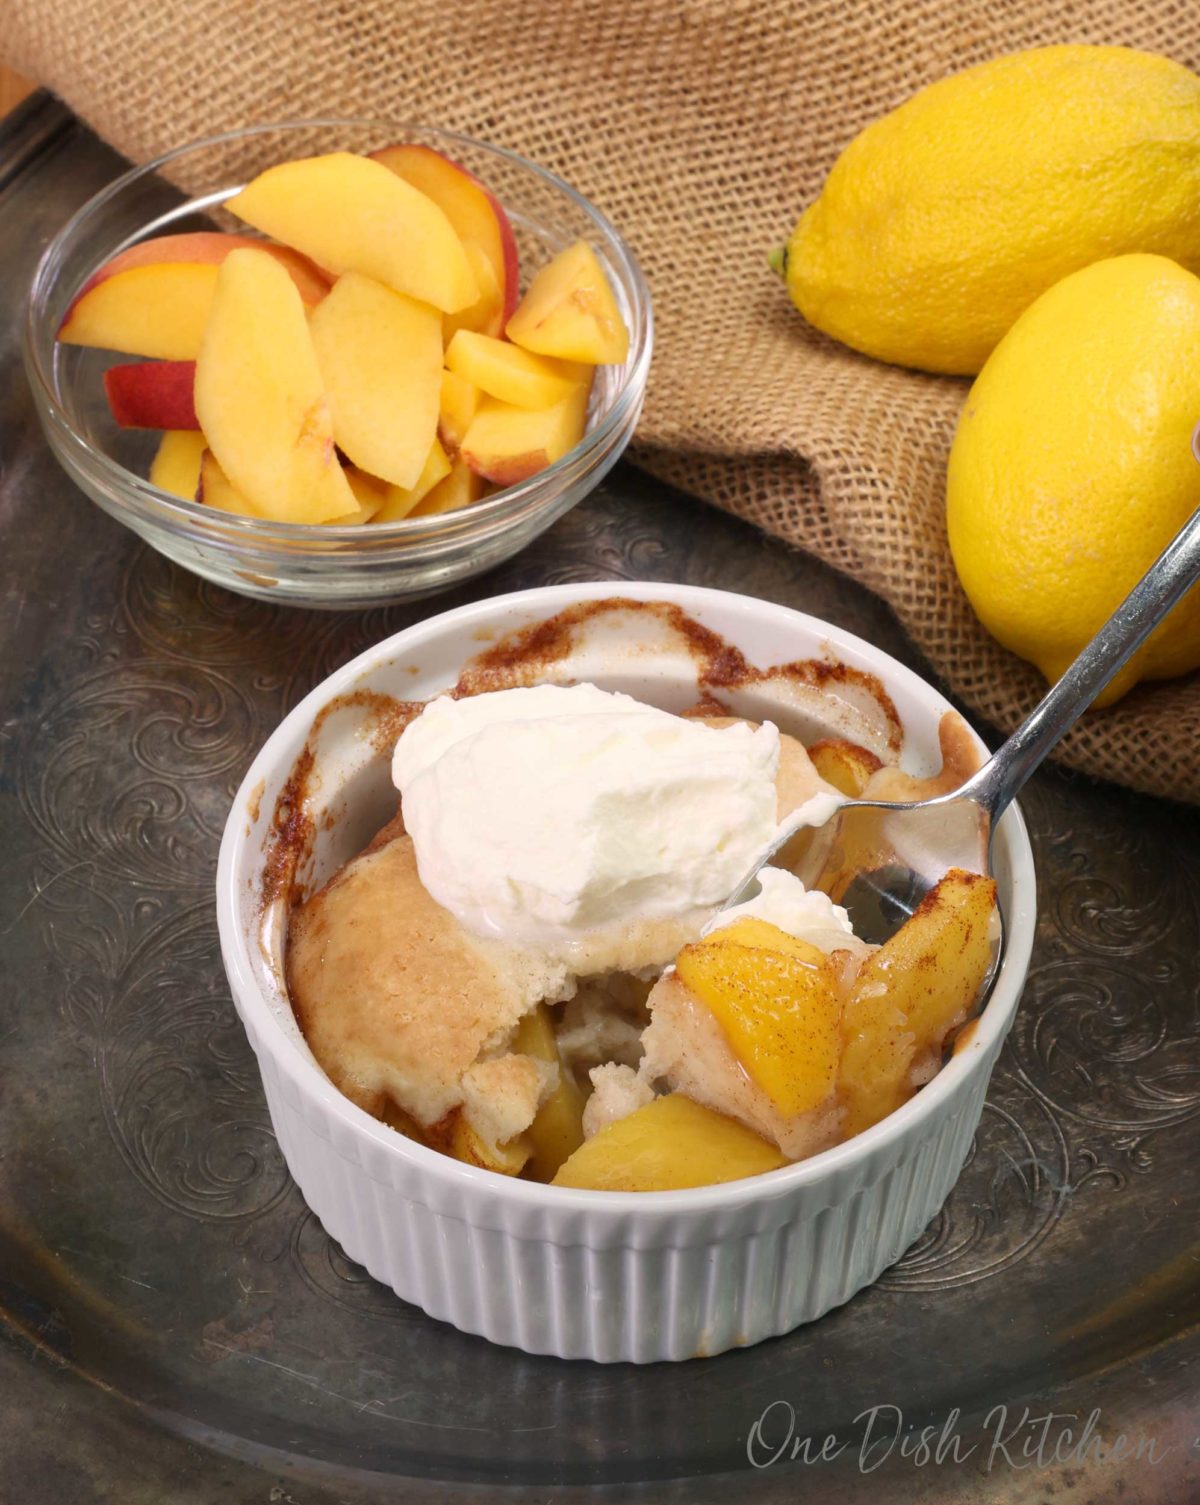 a spoonful of peaches from a peach cobbler with the cobbler in the background.